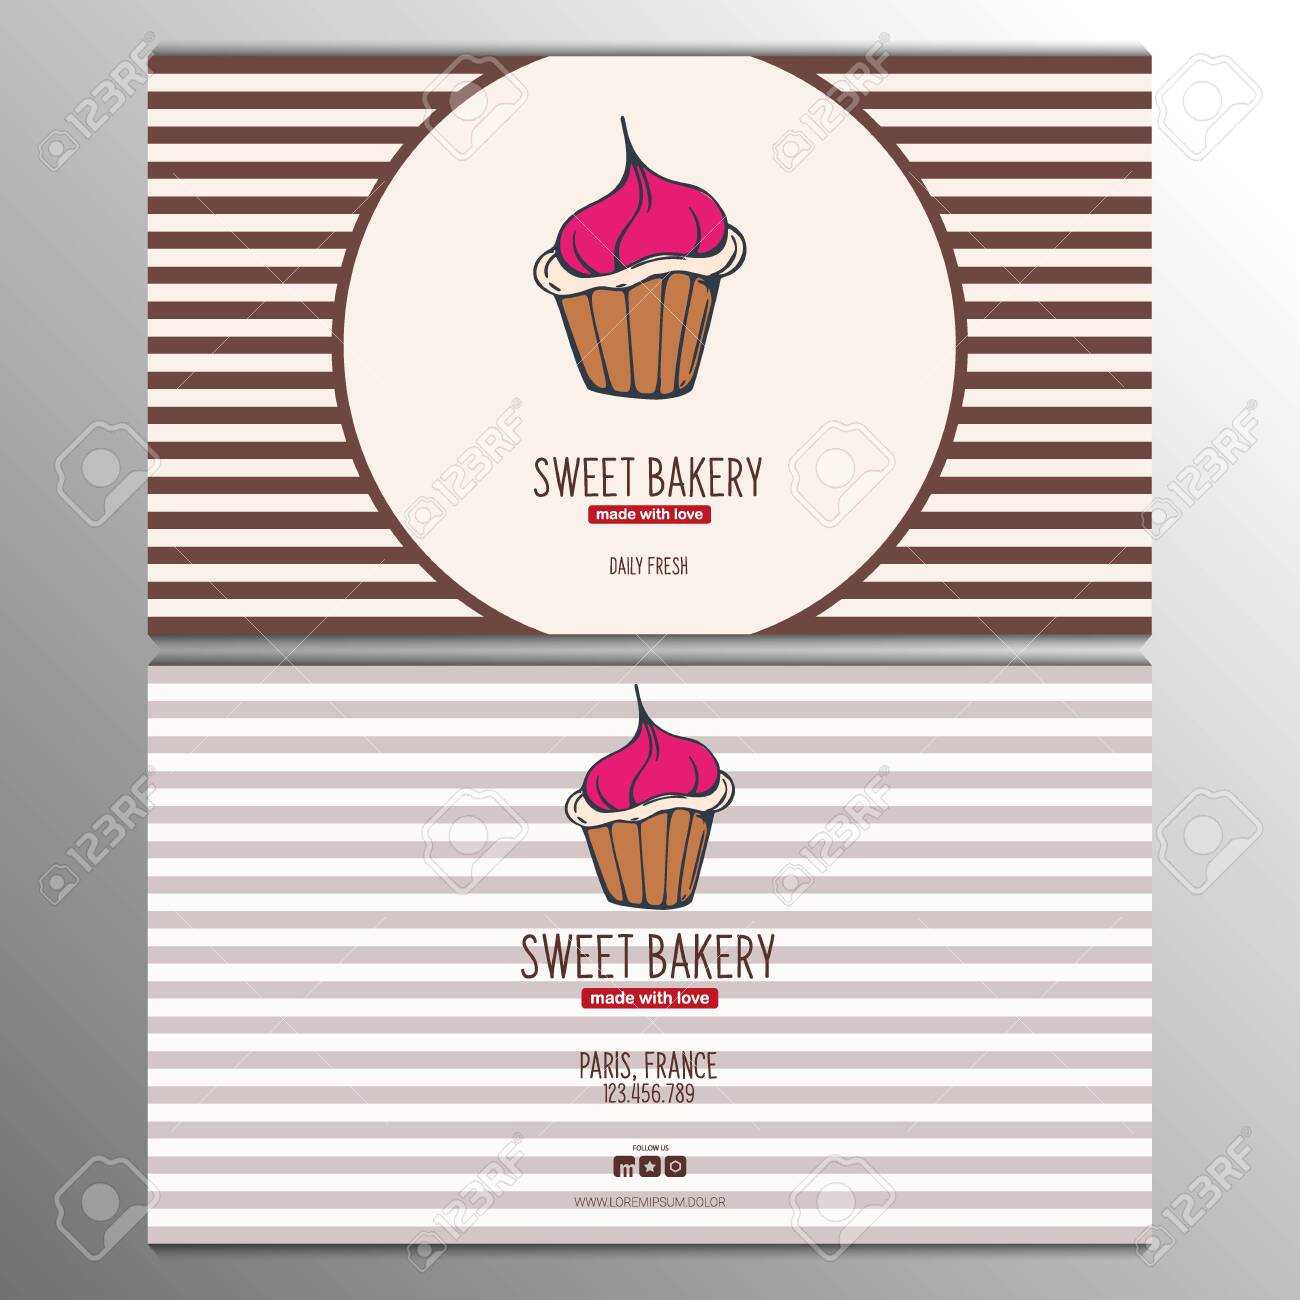 Cupcake Or Cake Business Card Template For Bakery Or Pastry. Inside Cake Business Cards Templates Free